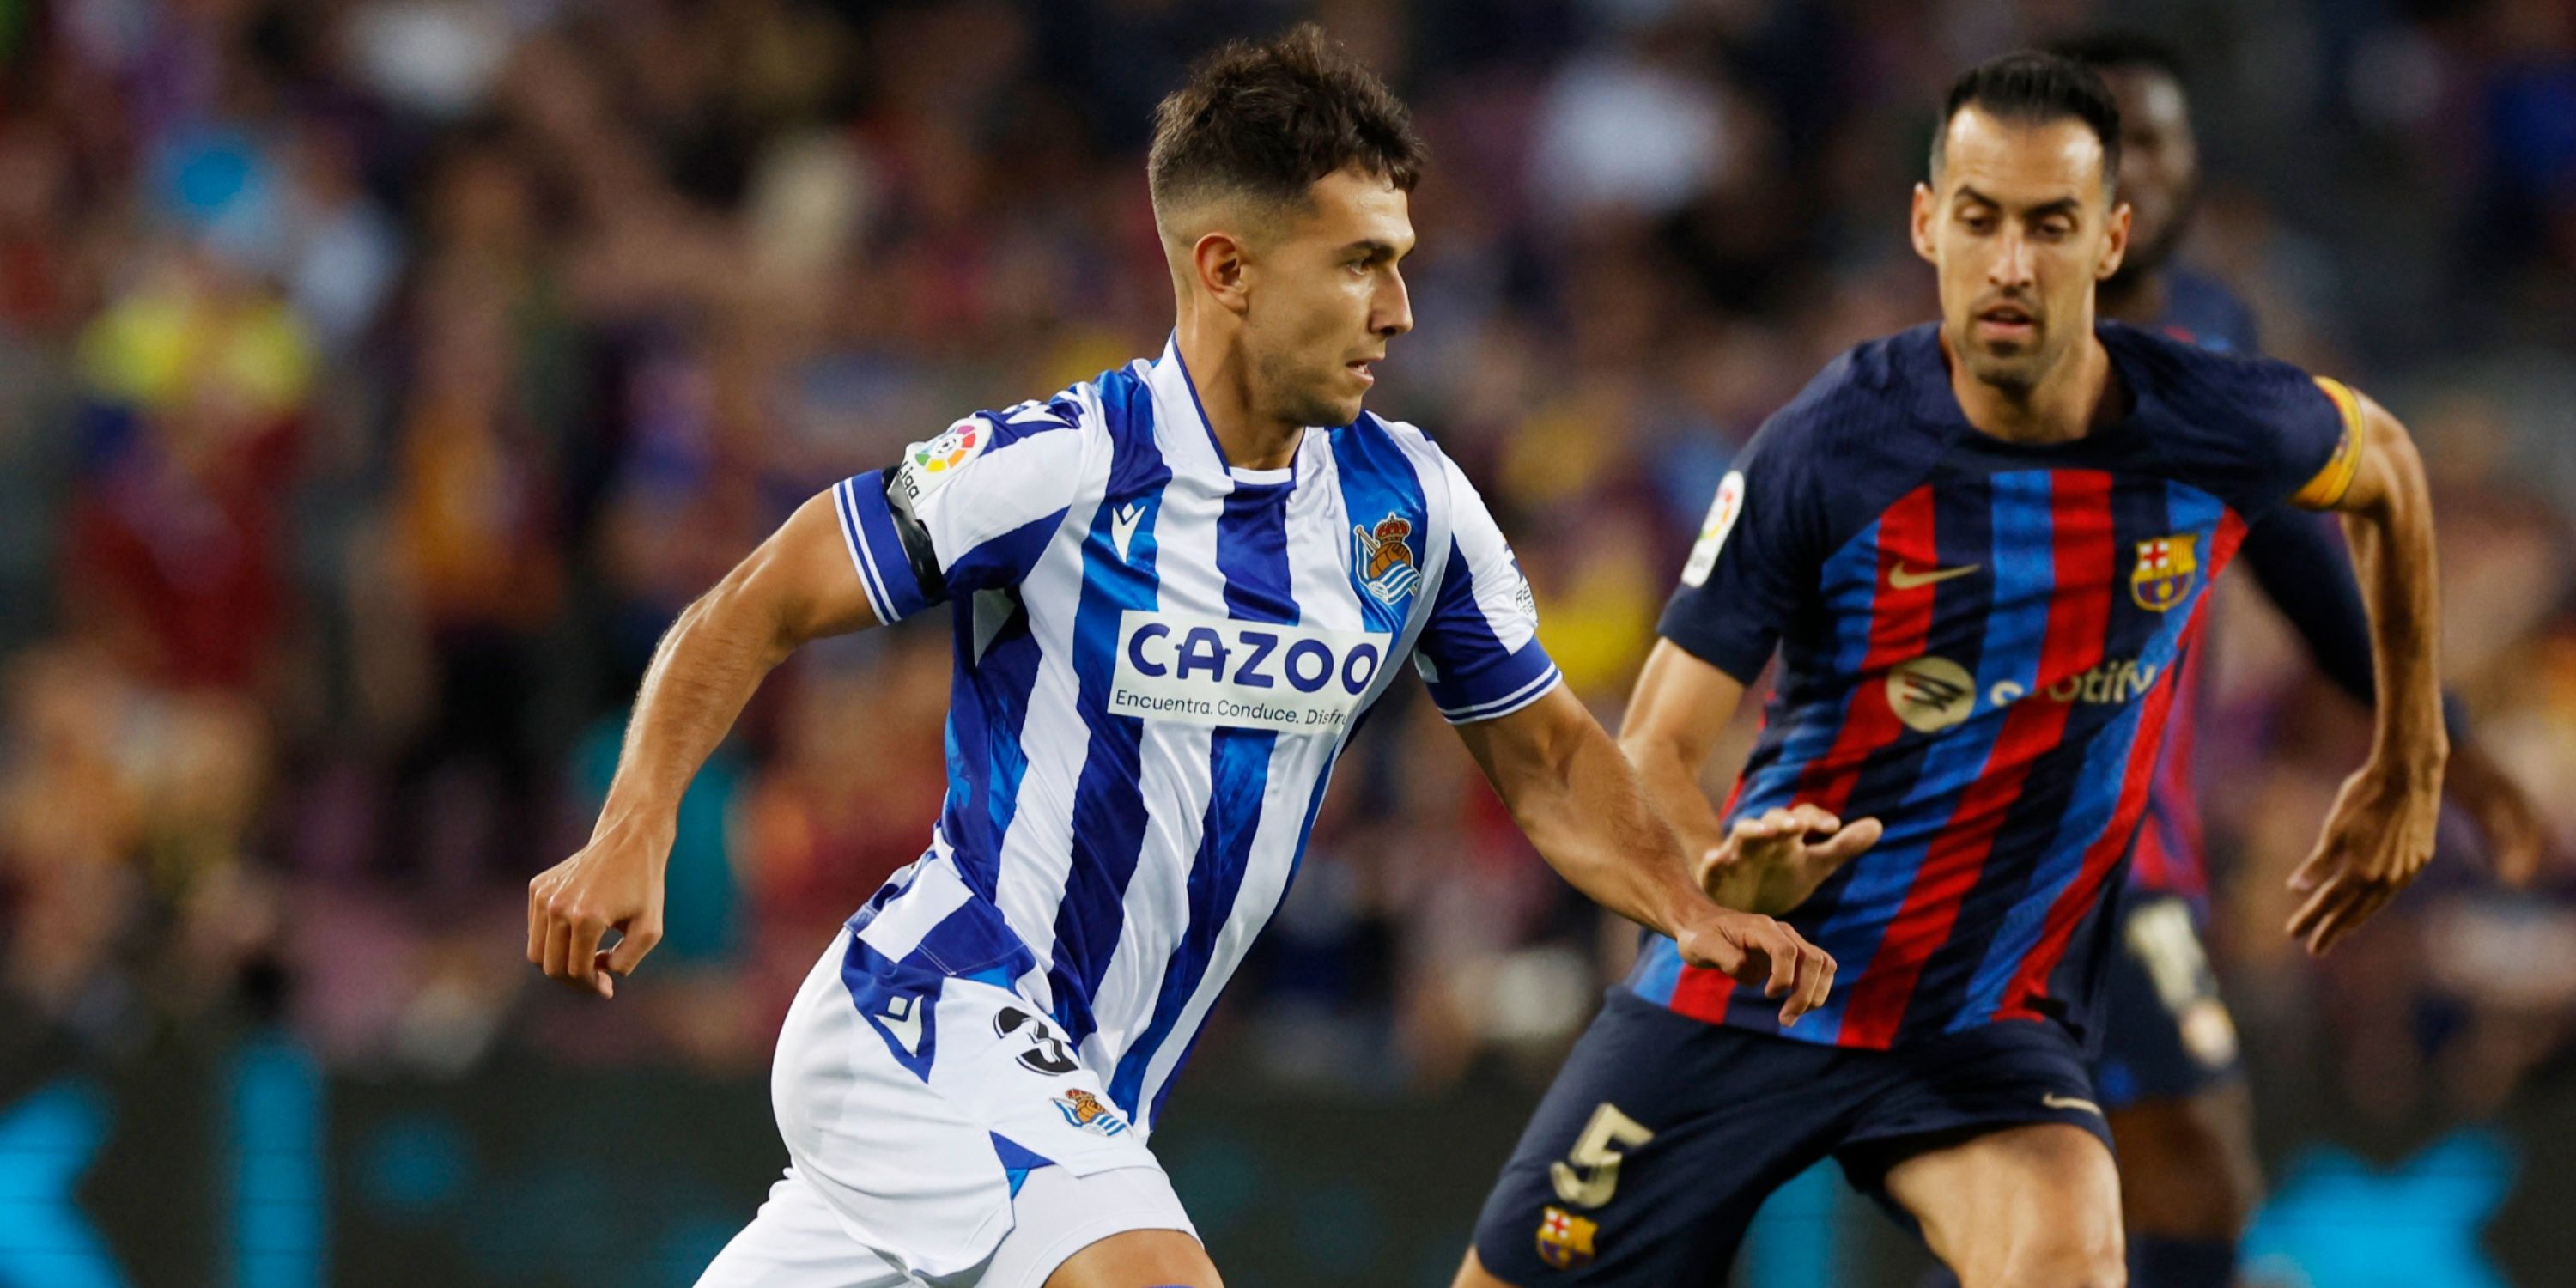 Real Sociedad's Martin Zubimendi running with the ball